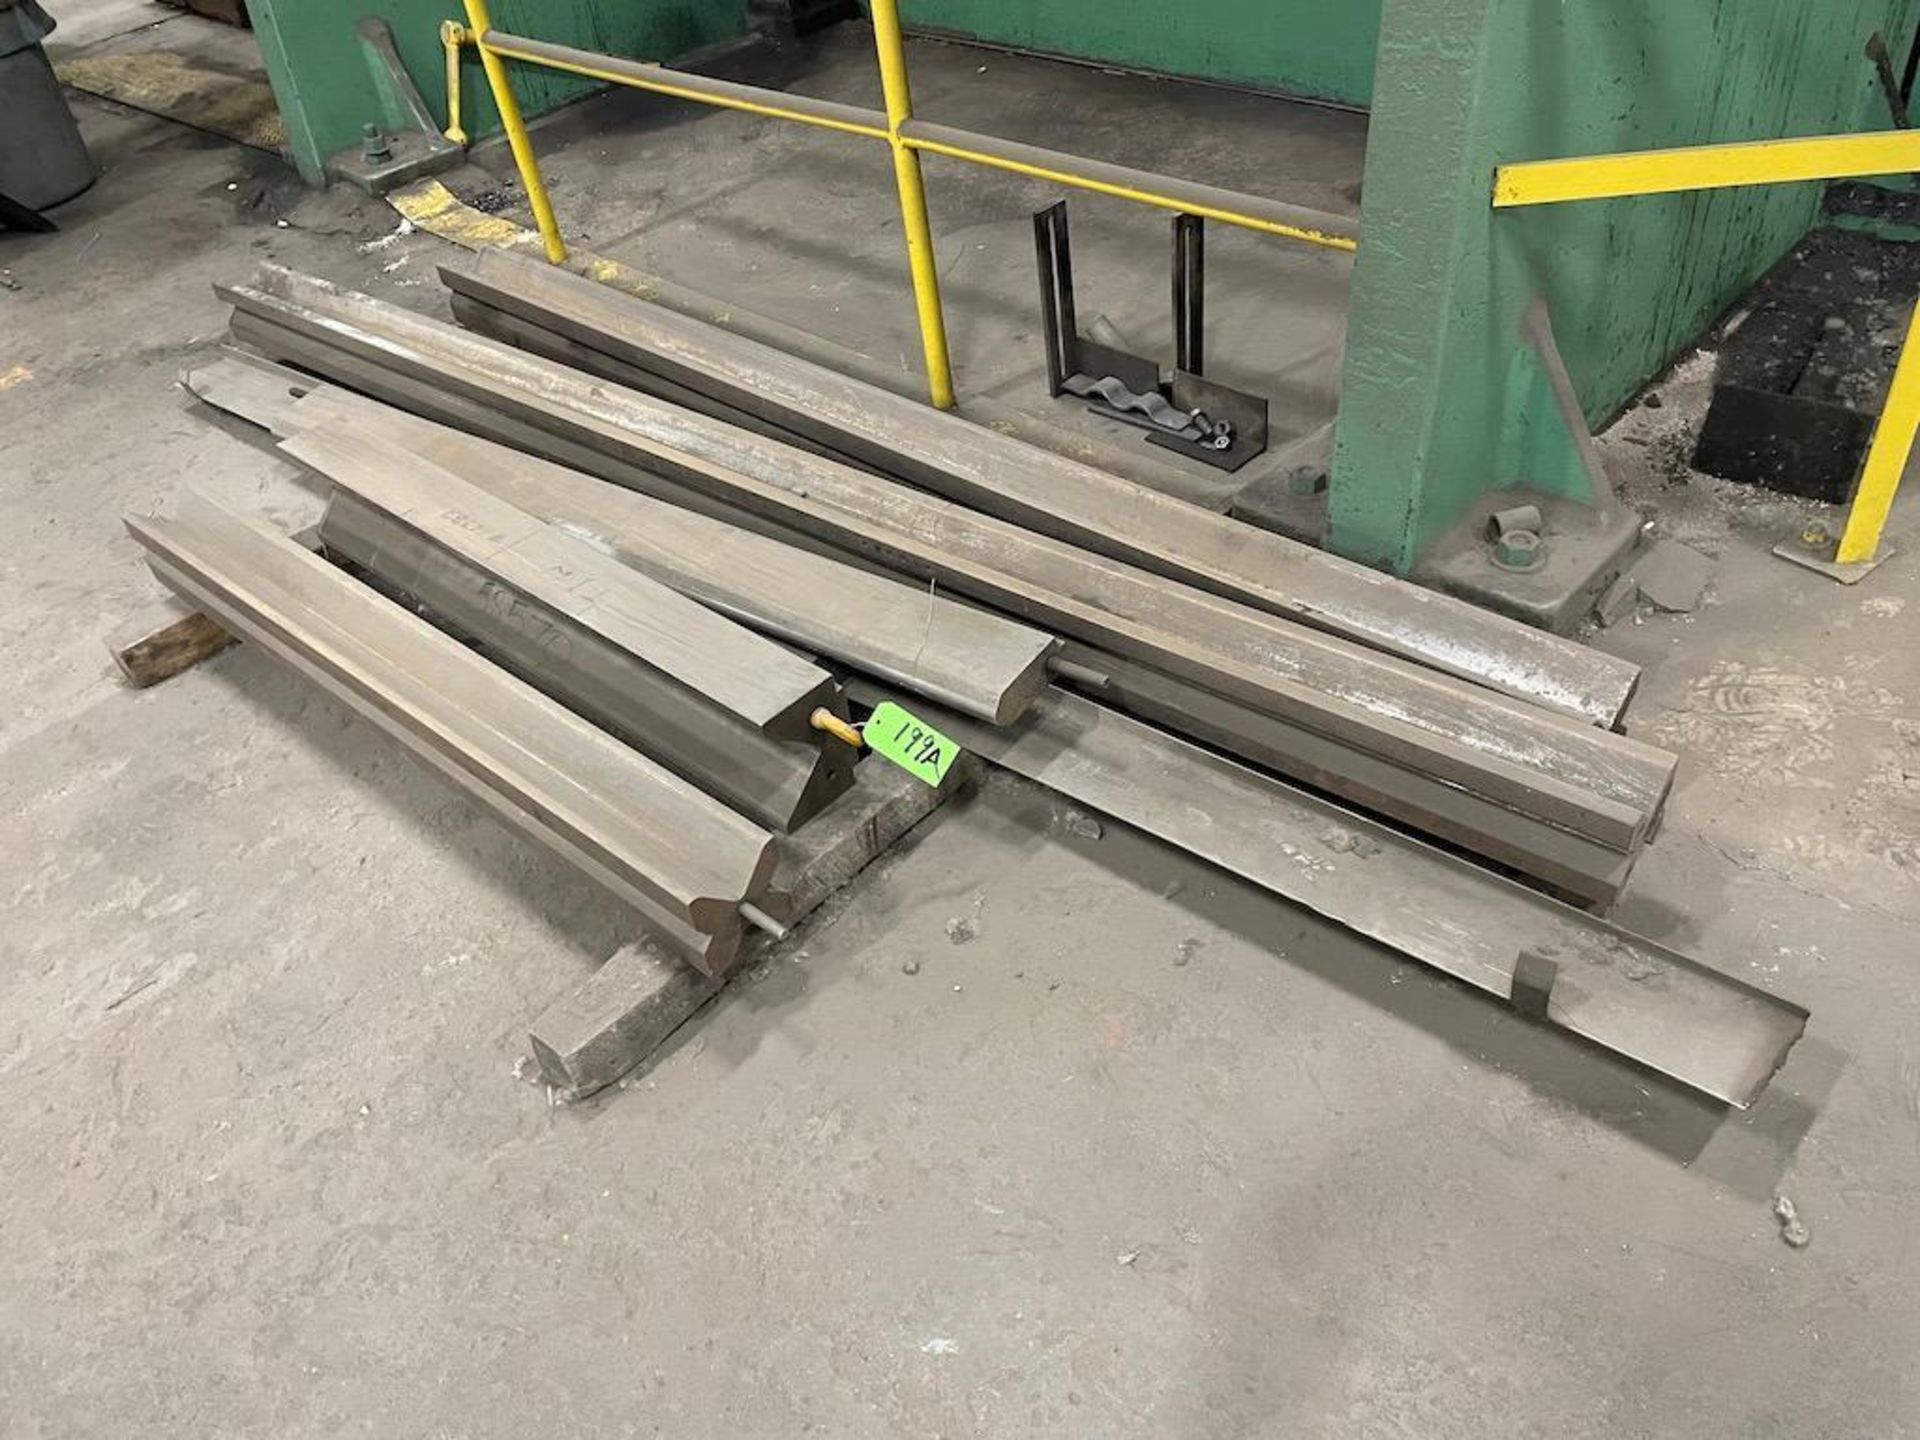 LOT 5 ASSORTED PRESS BRAKE DIES, INCLUDING 4 WAY UP TO APPROX. 10'